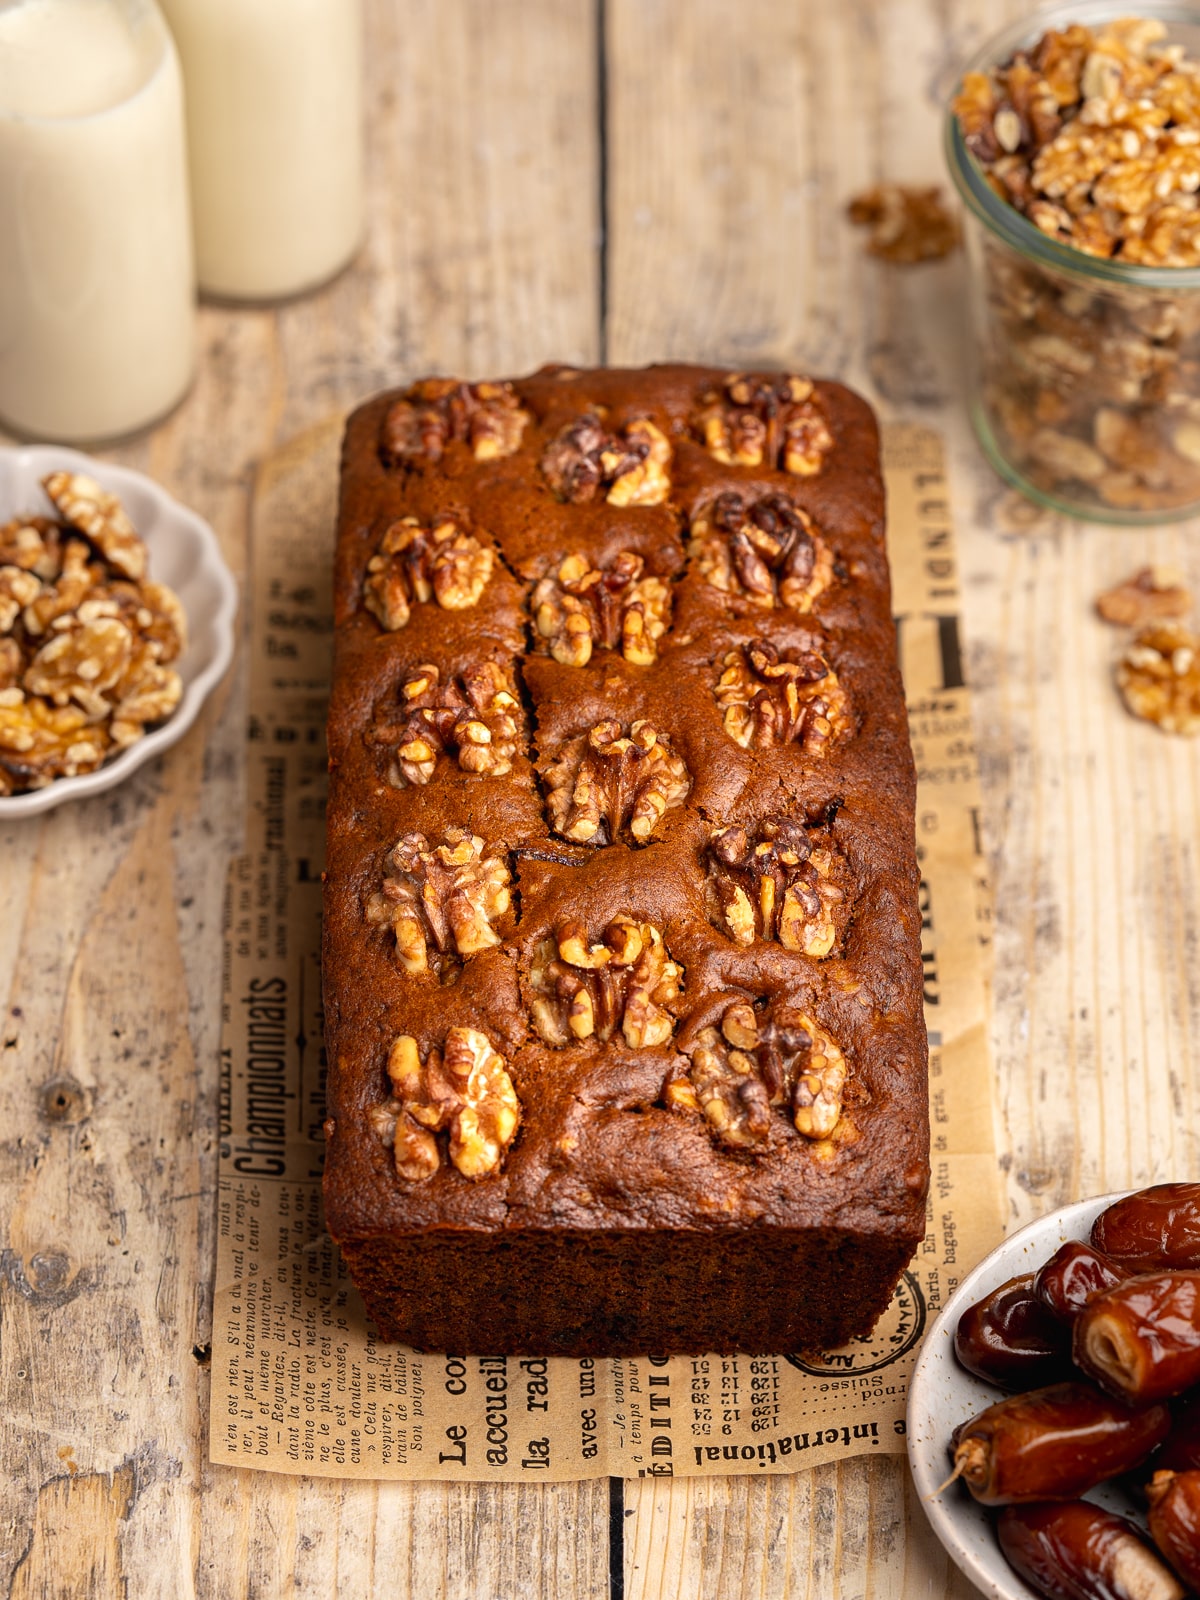 a loaf of freshly baked date cake with walnuts on top on a wooden surface with whole dates and walnuts scattered around.